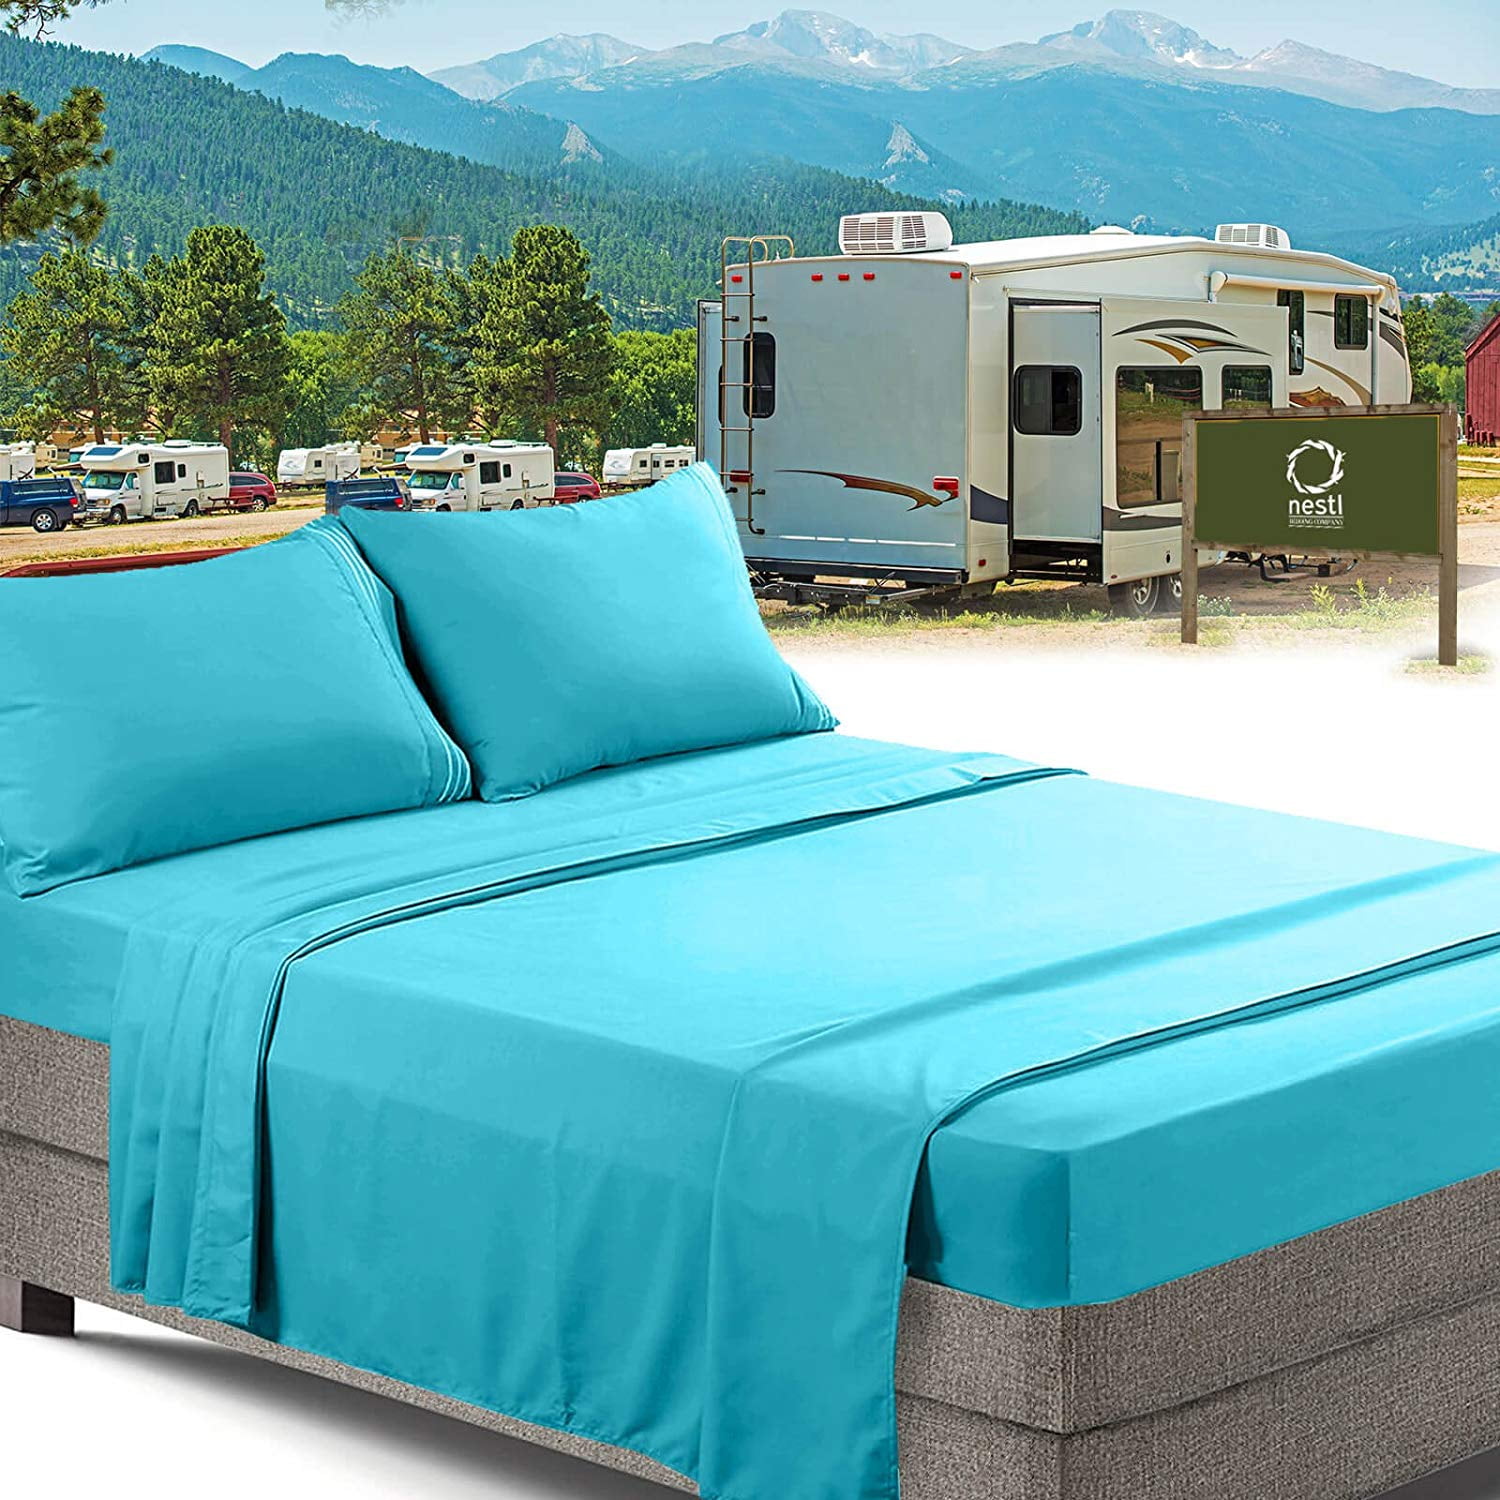 Nestl RV/Short Queen Bed Sheets Set Bedding Sheets Set for Campers, 4-Piece Bed Set, Deep Pockets Fitted Sheet, 100% Luxury Soft Microfiber, Hypoallergenic, Cool & Breathable, Beach Blue